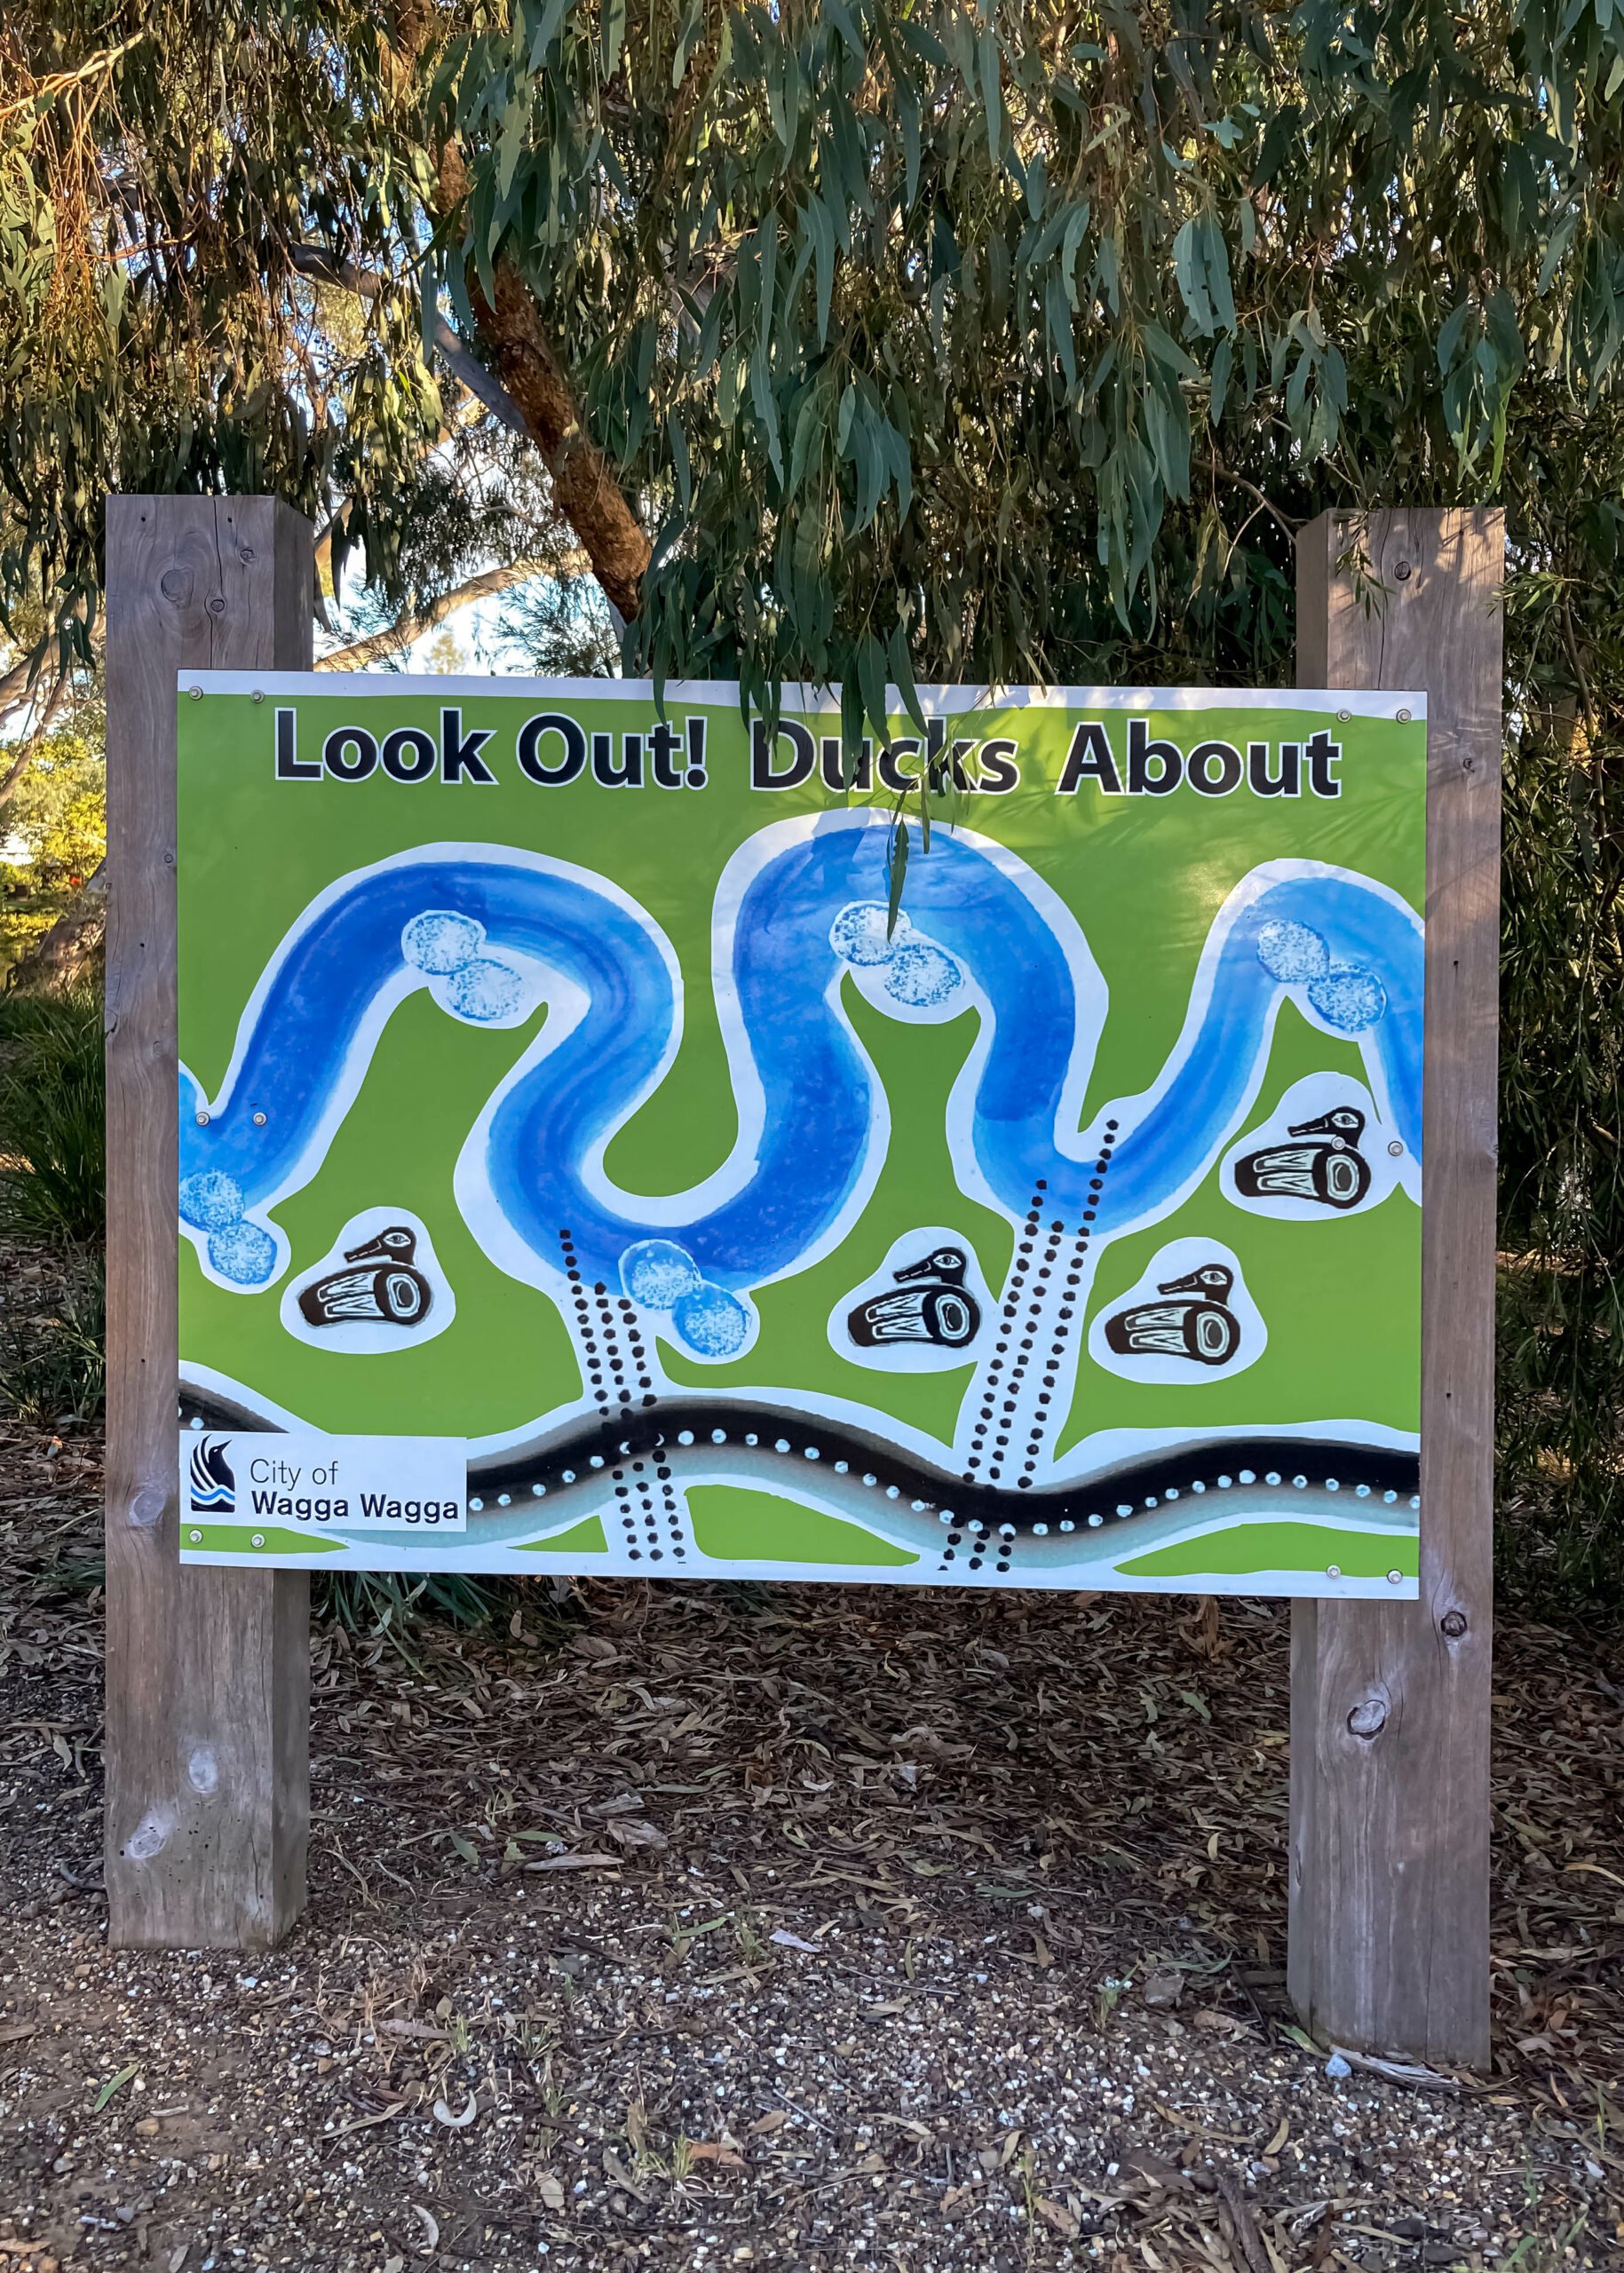 A sign stating "look Out Ducks About" with an image of a curving waterway and pictures of ducks